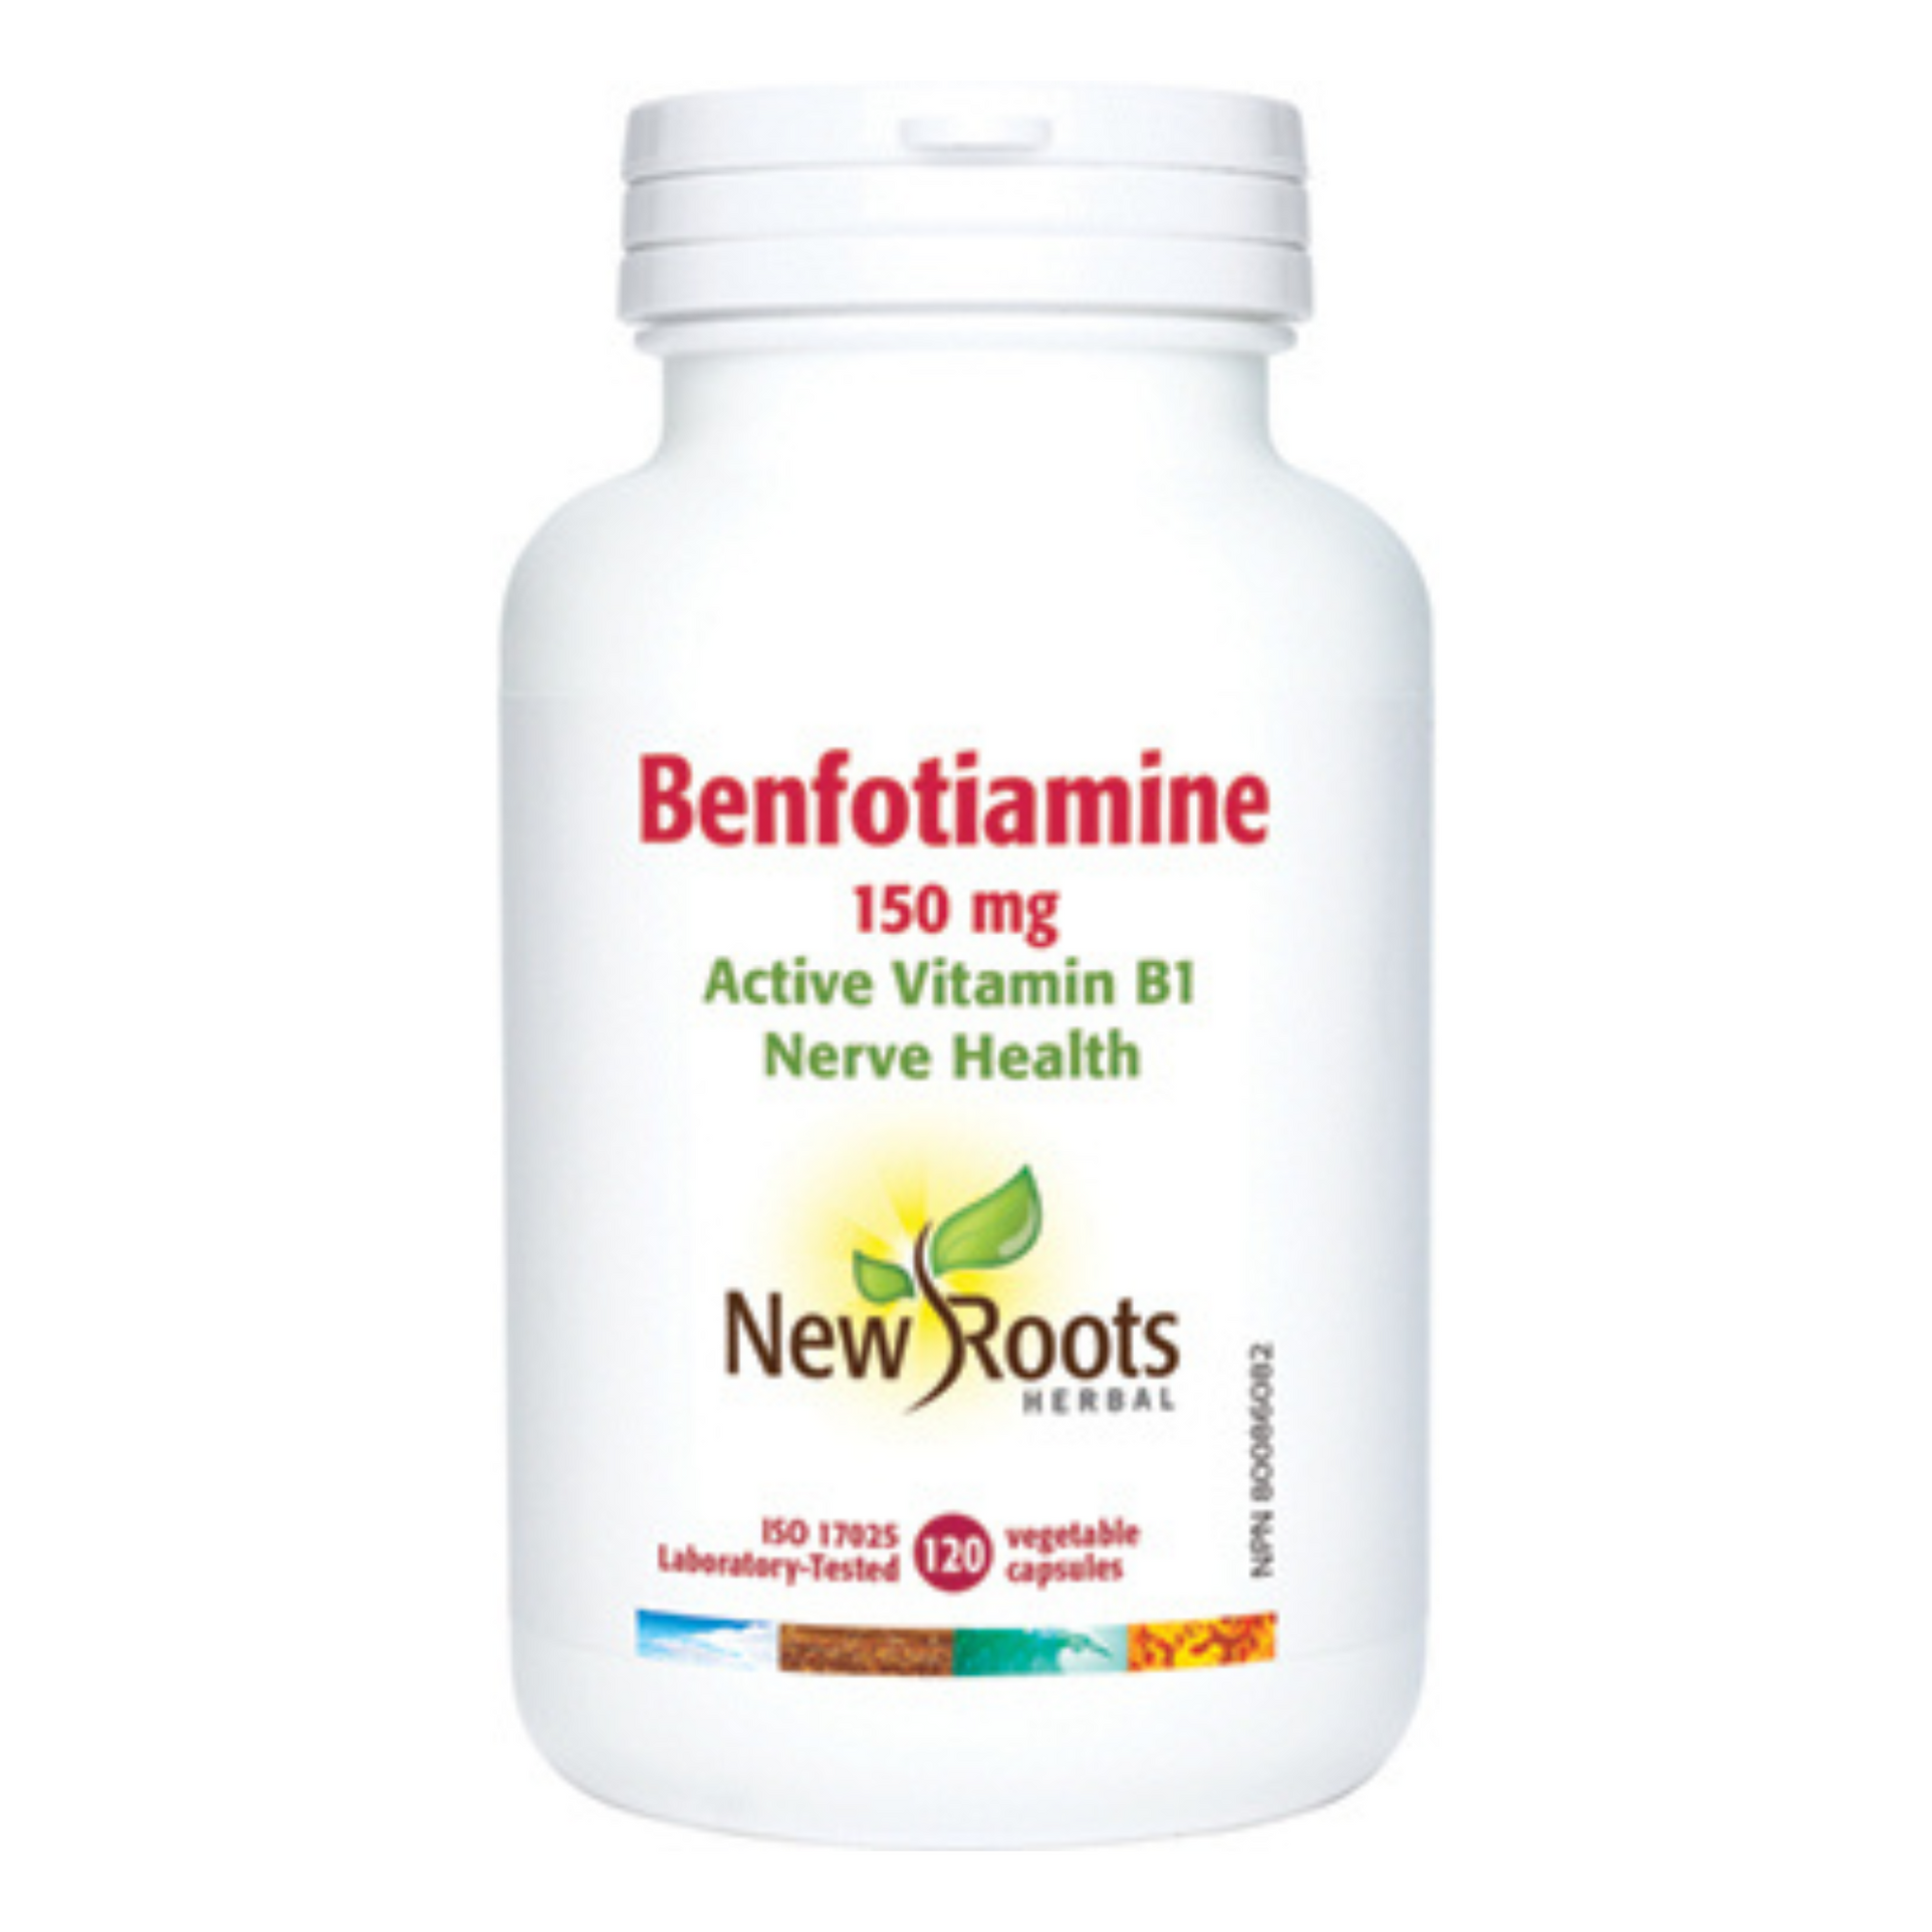 New Roots Benfotiamine 150 mg - Active Vitamin B1 - Nerve Healthy - 120 vegetable capsules in a bottle. 